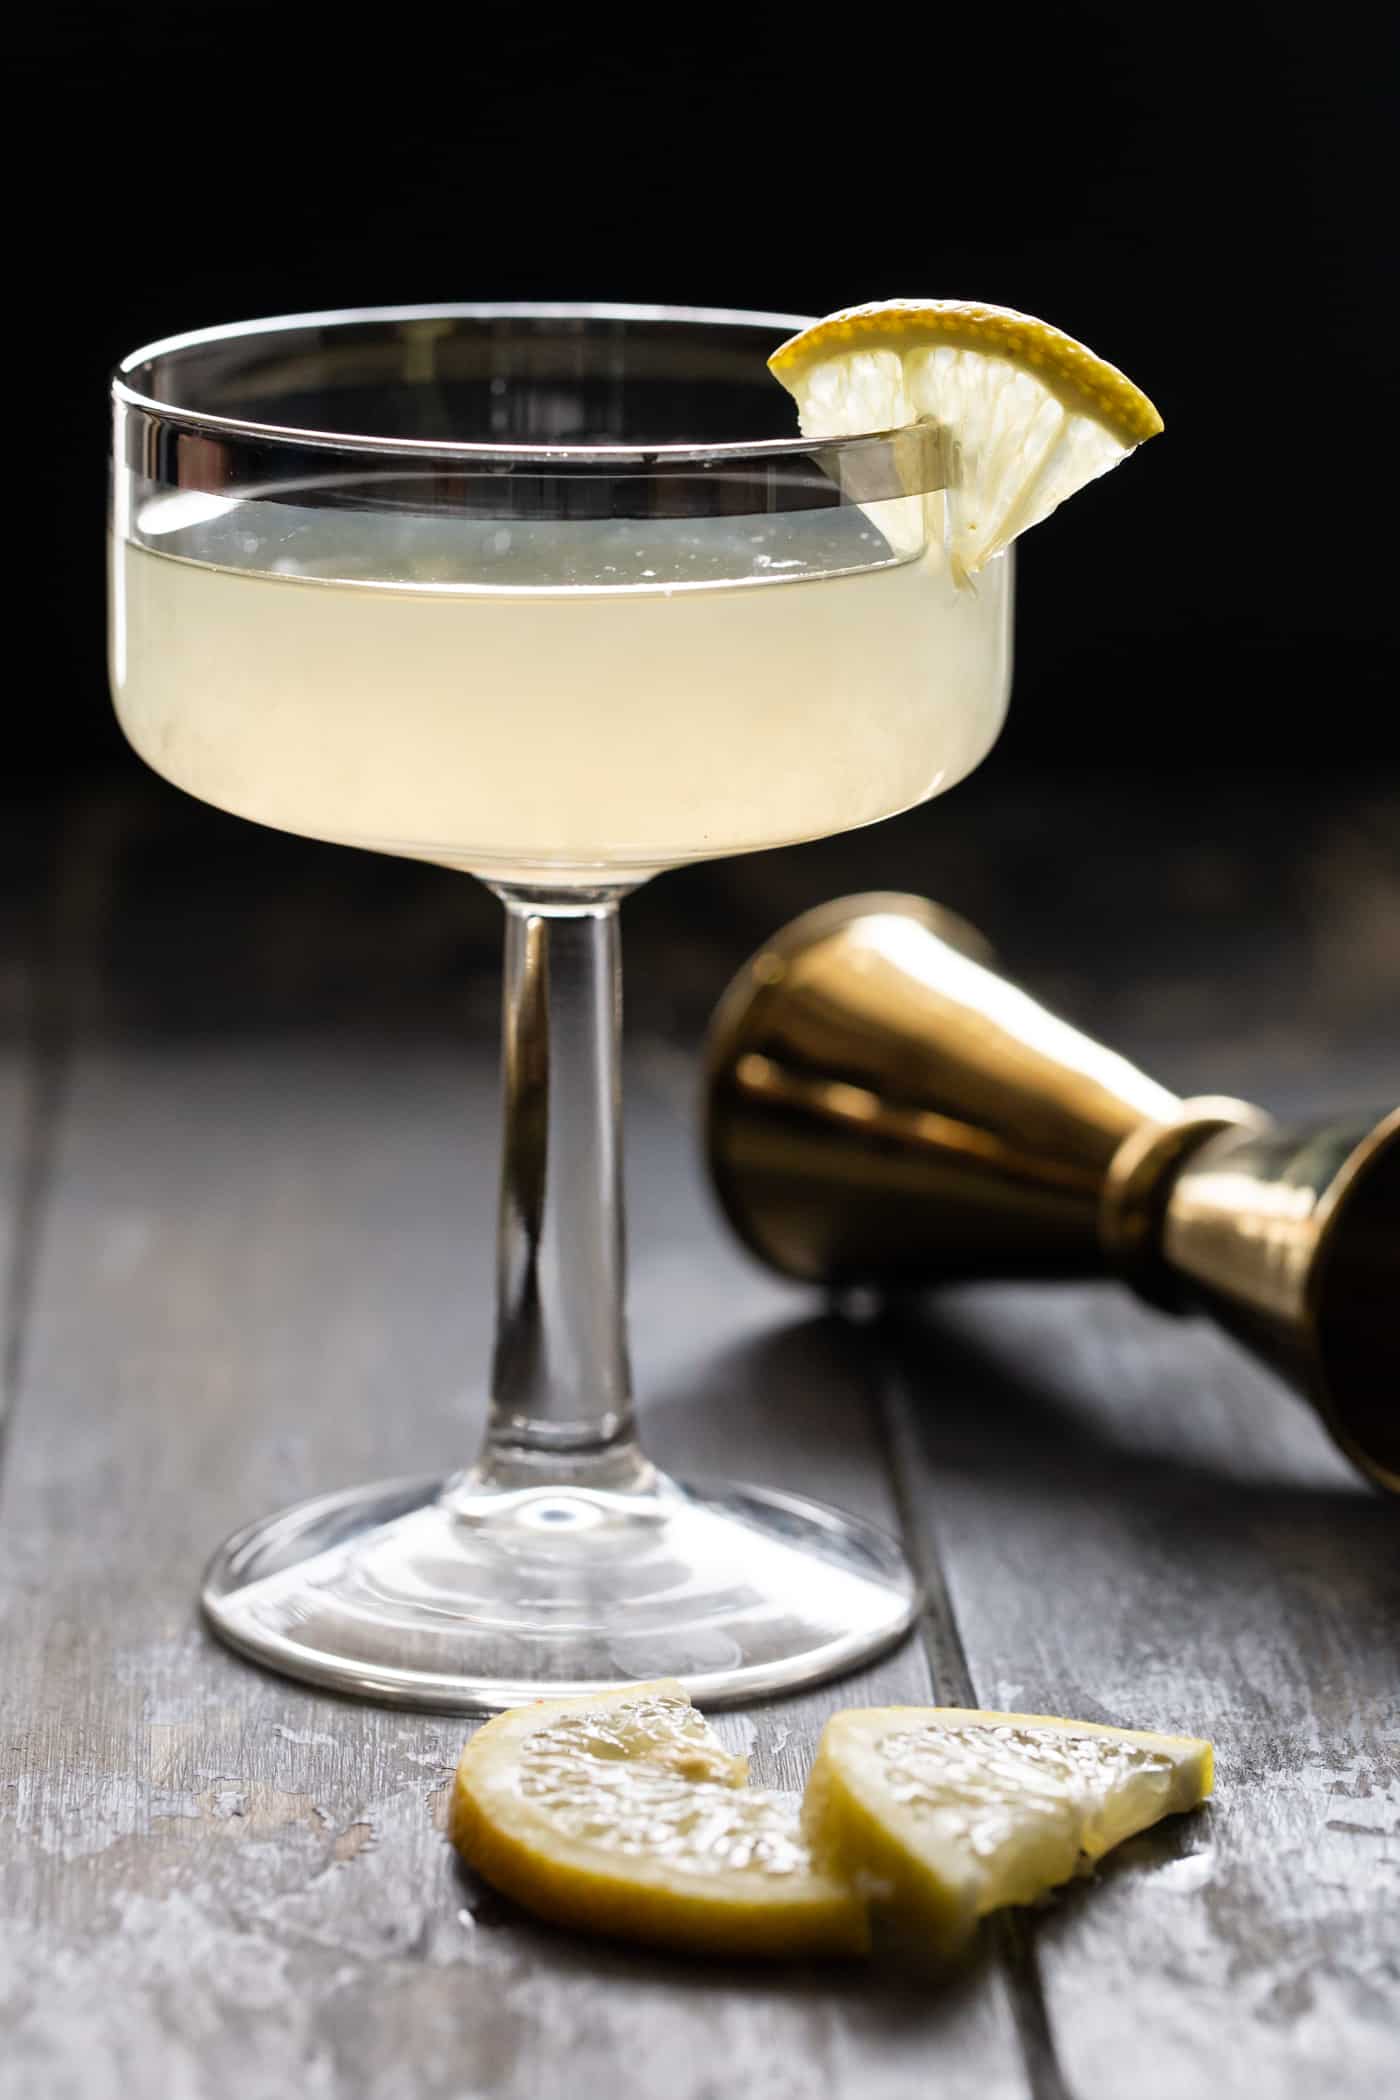 Close up of a  glass filled with Ginger pear Martini recipe and garnished with a small lemon slice. Ona dark background with a gold jigger.